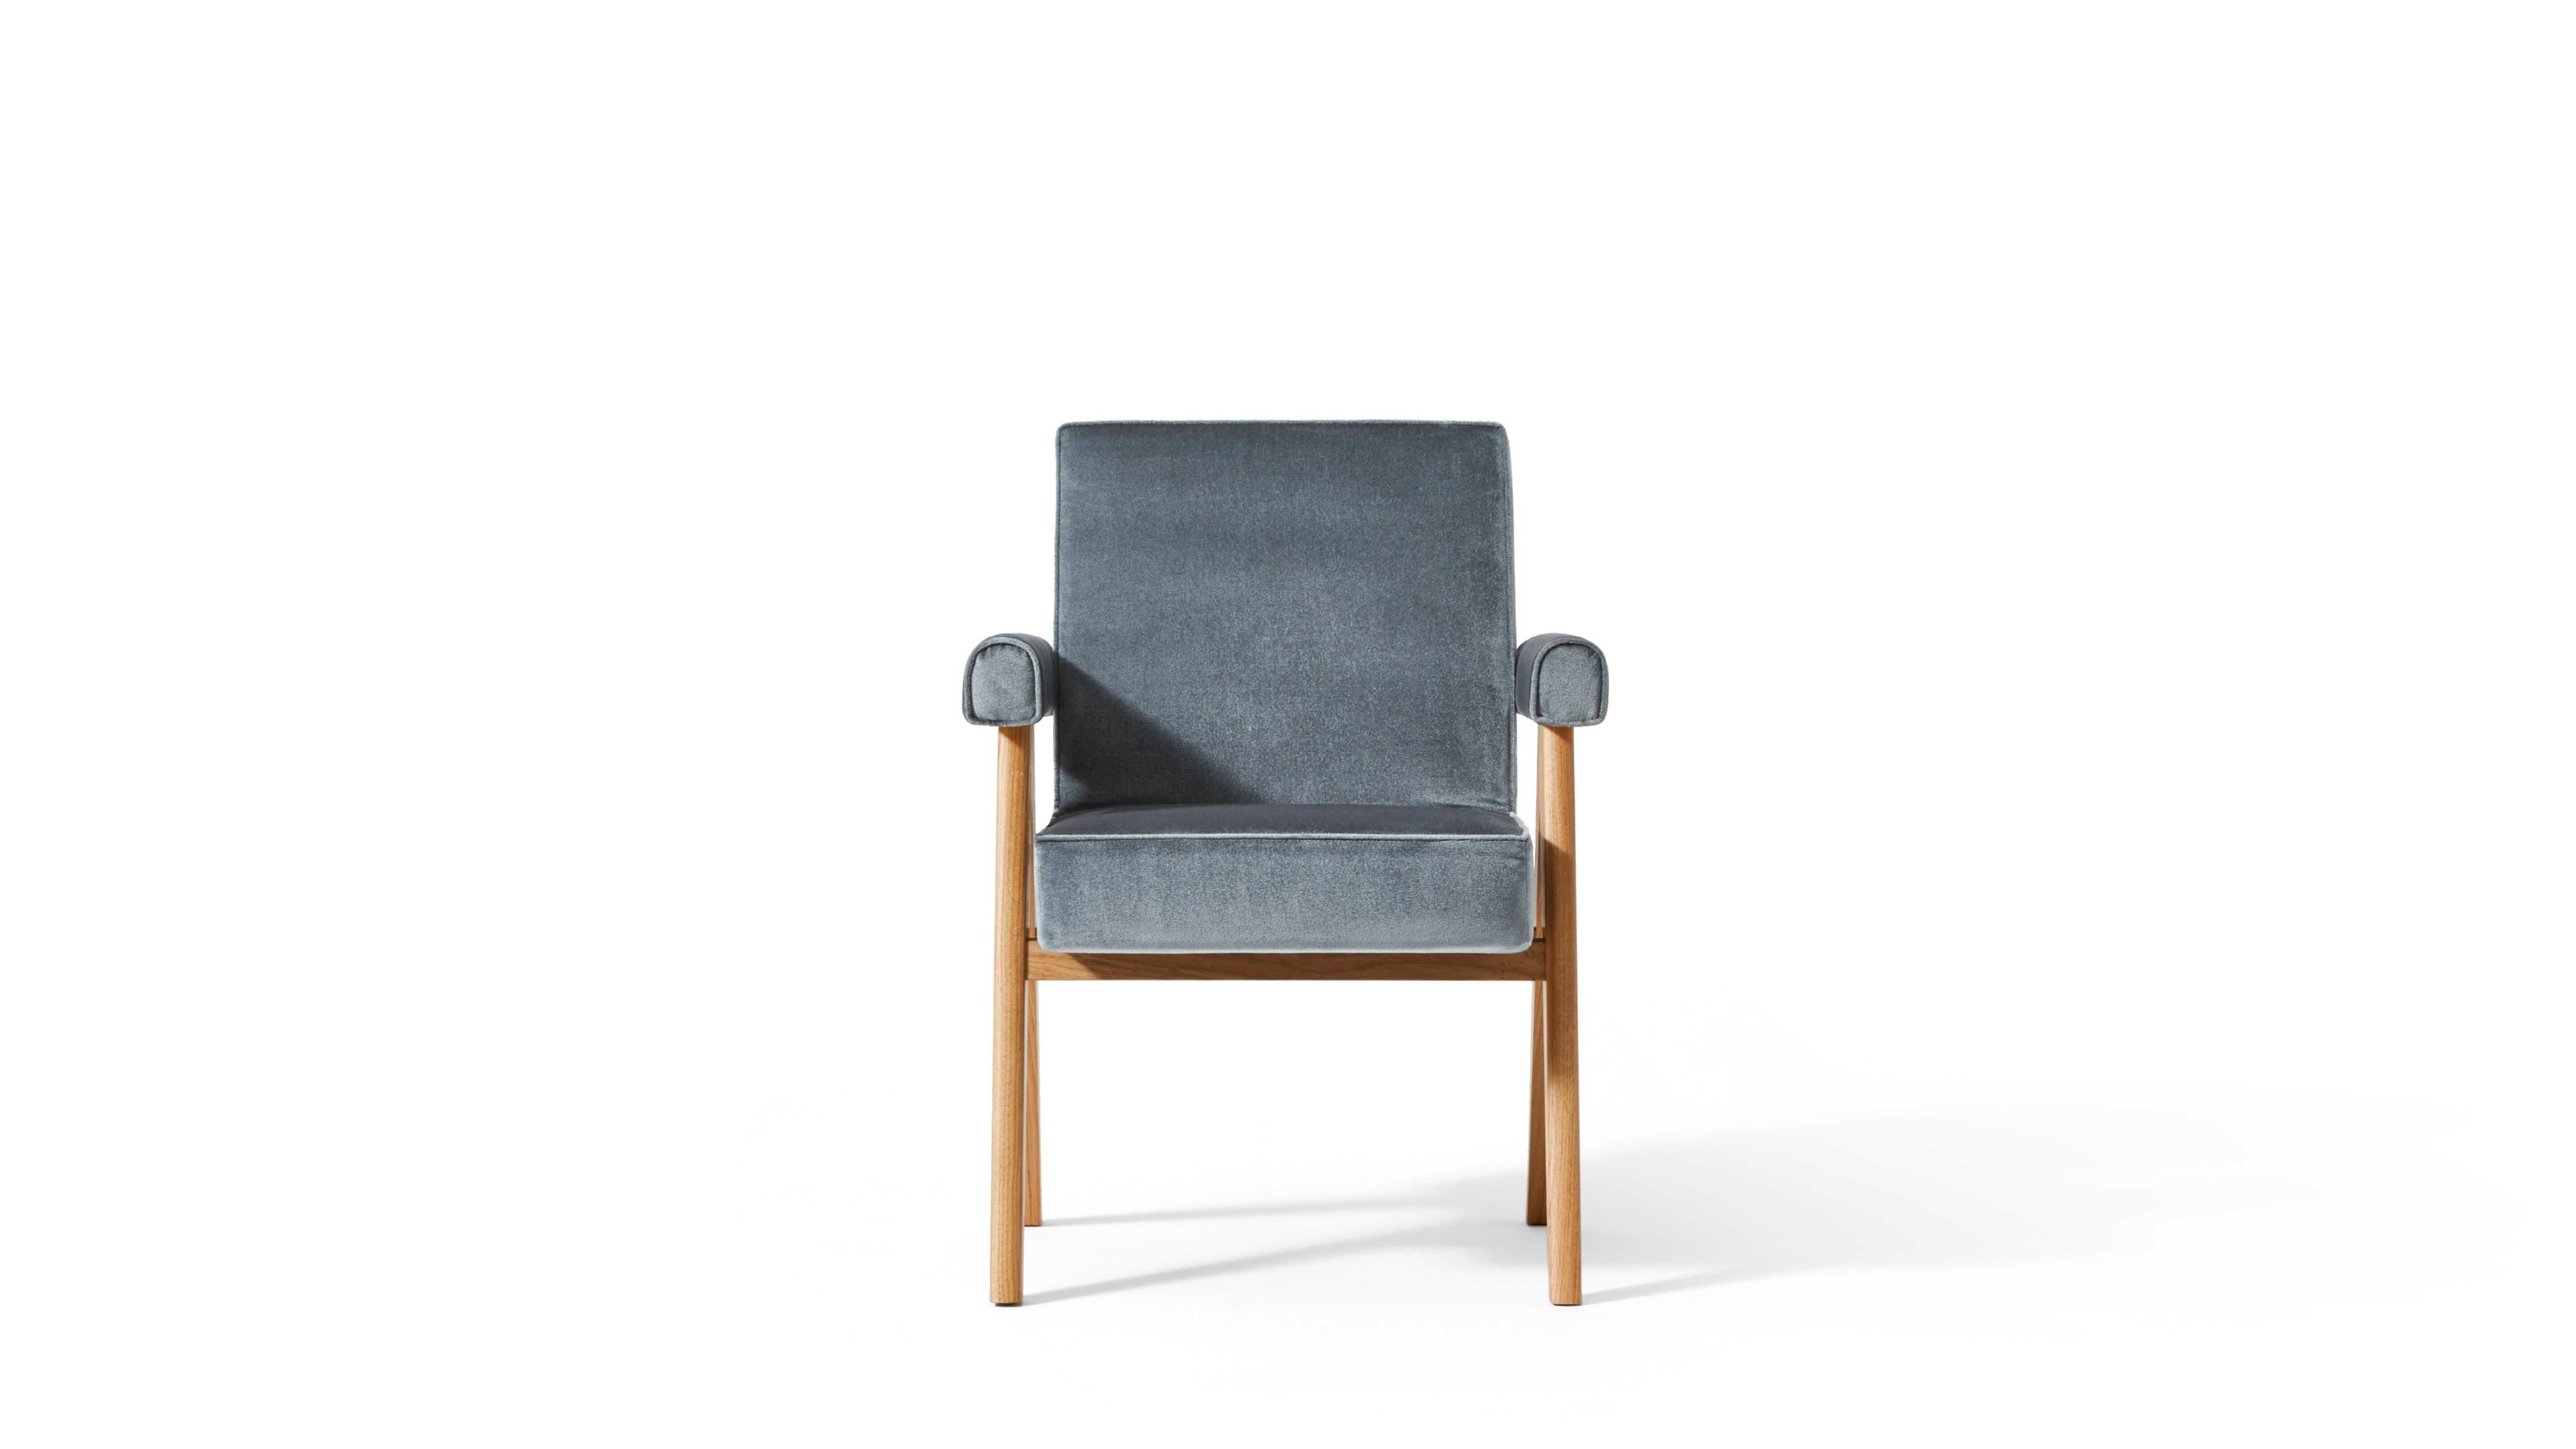 XXIe siècle et contemporain Pierre Jeanneret Committee Dining Chair for Cassina, Italy - New  en vente